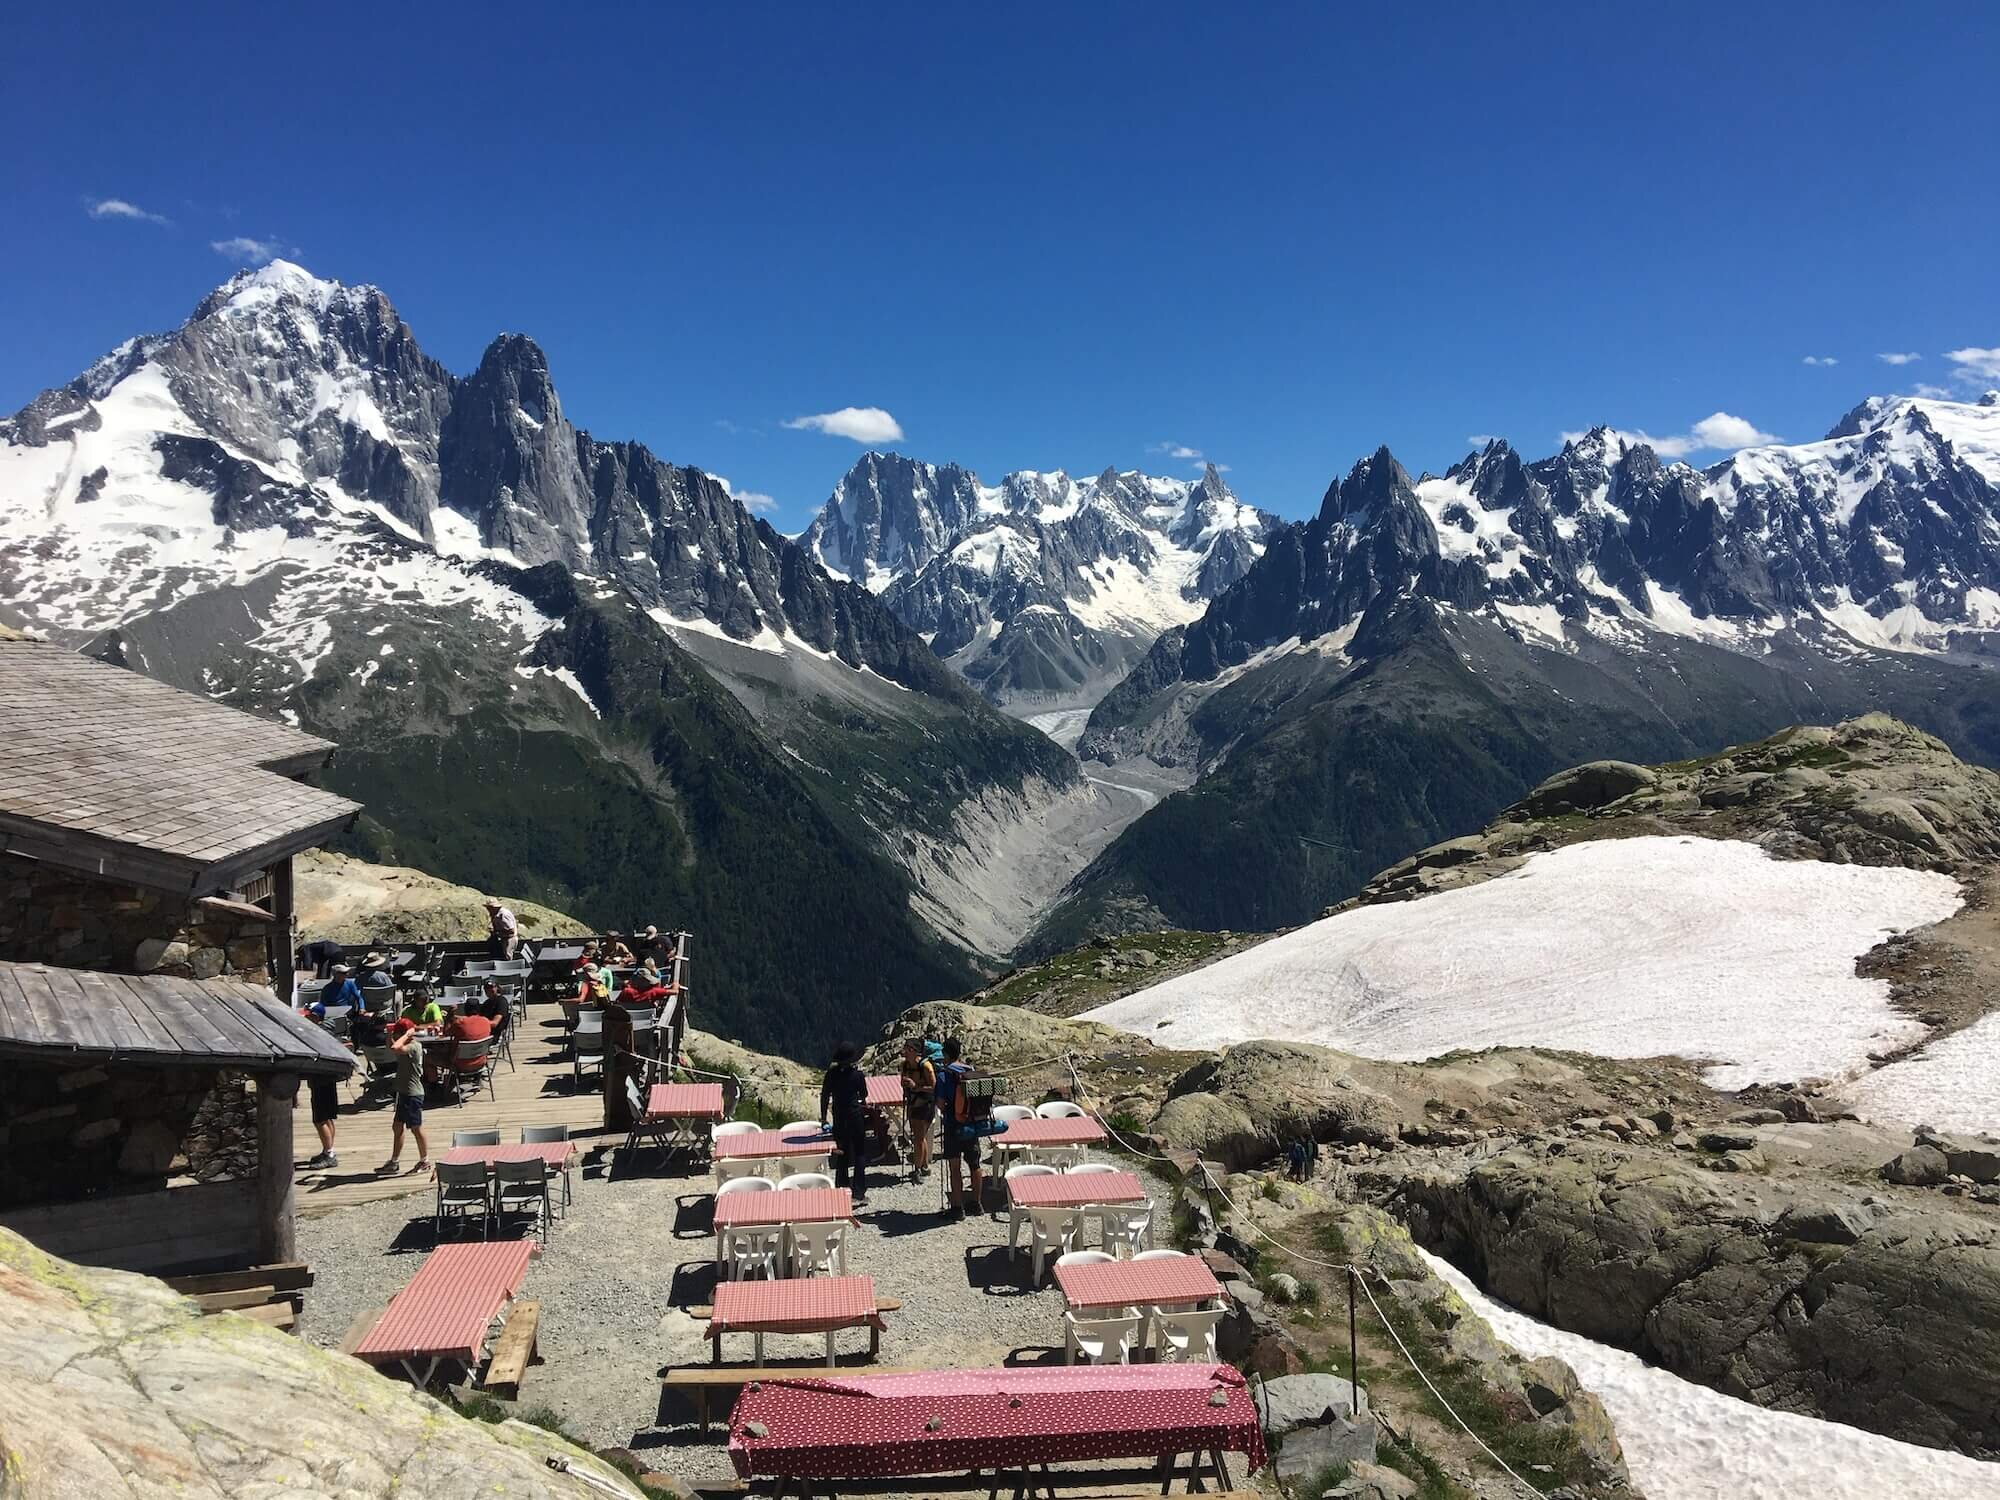 How much does it cost to hike the Tour du Mont Blanc?